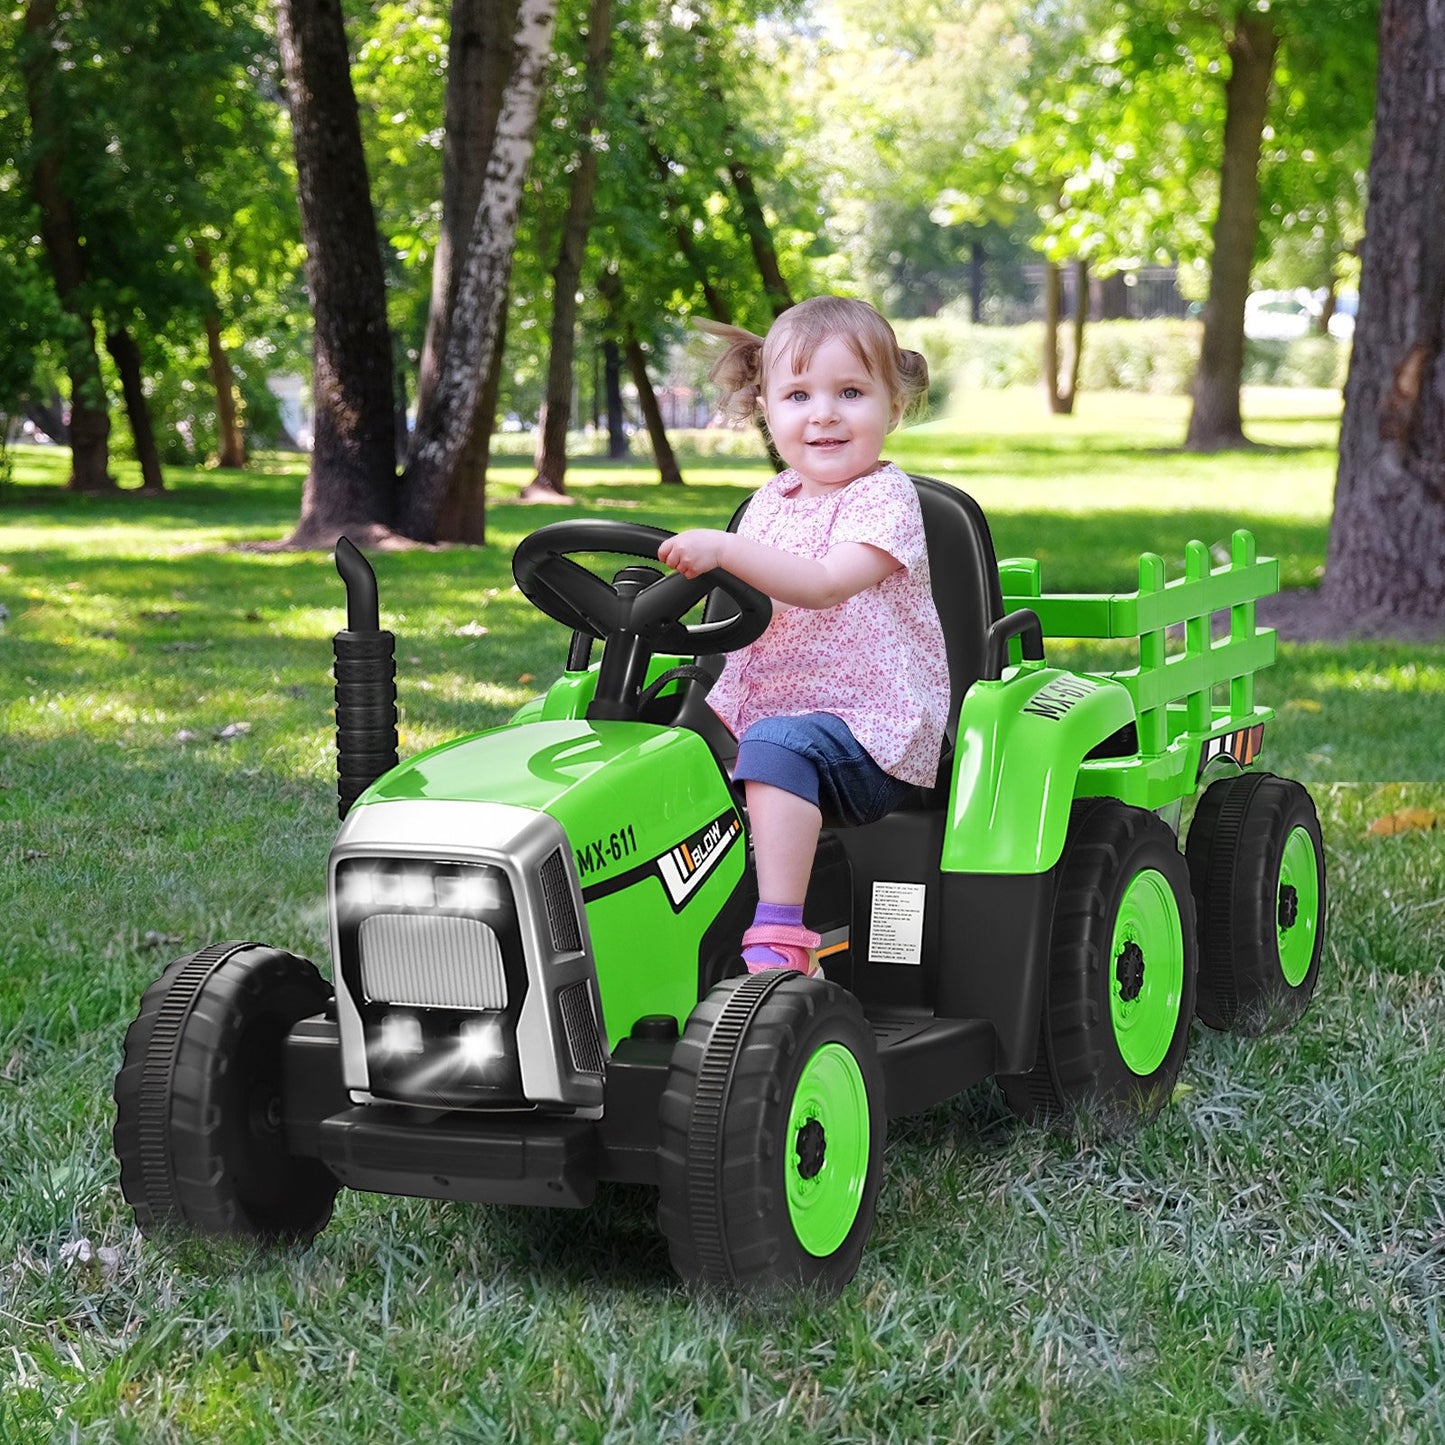 12V Ride on Tractor with 3-Gear-Shift Ground Loader for Kids 3+ Years Old, Green - Gallery Canada